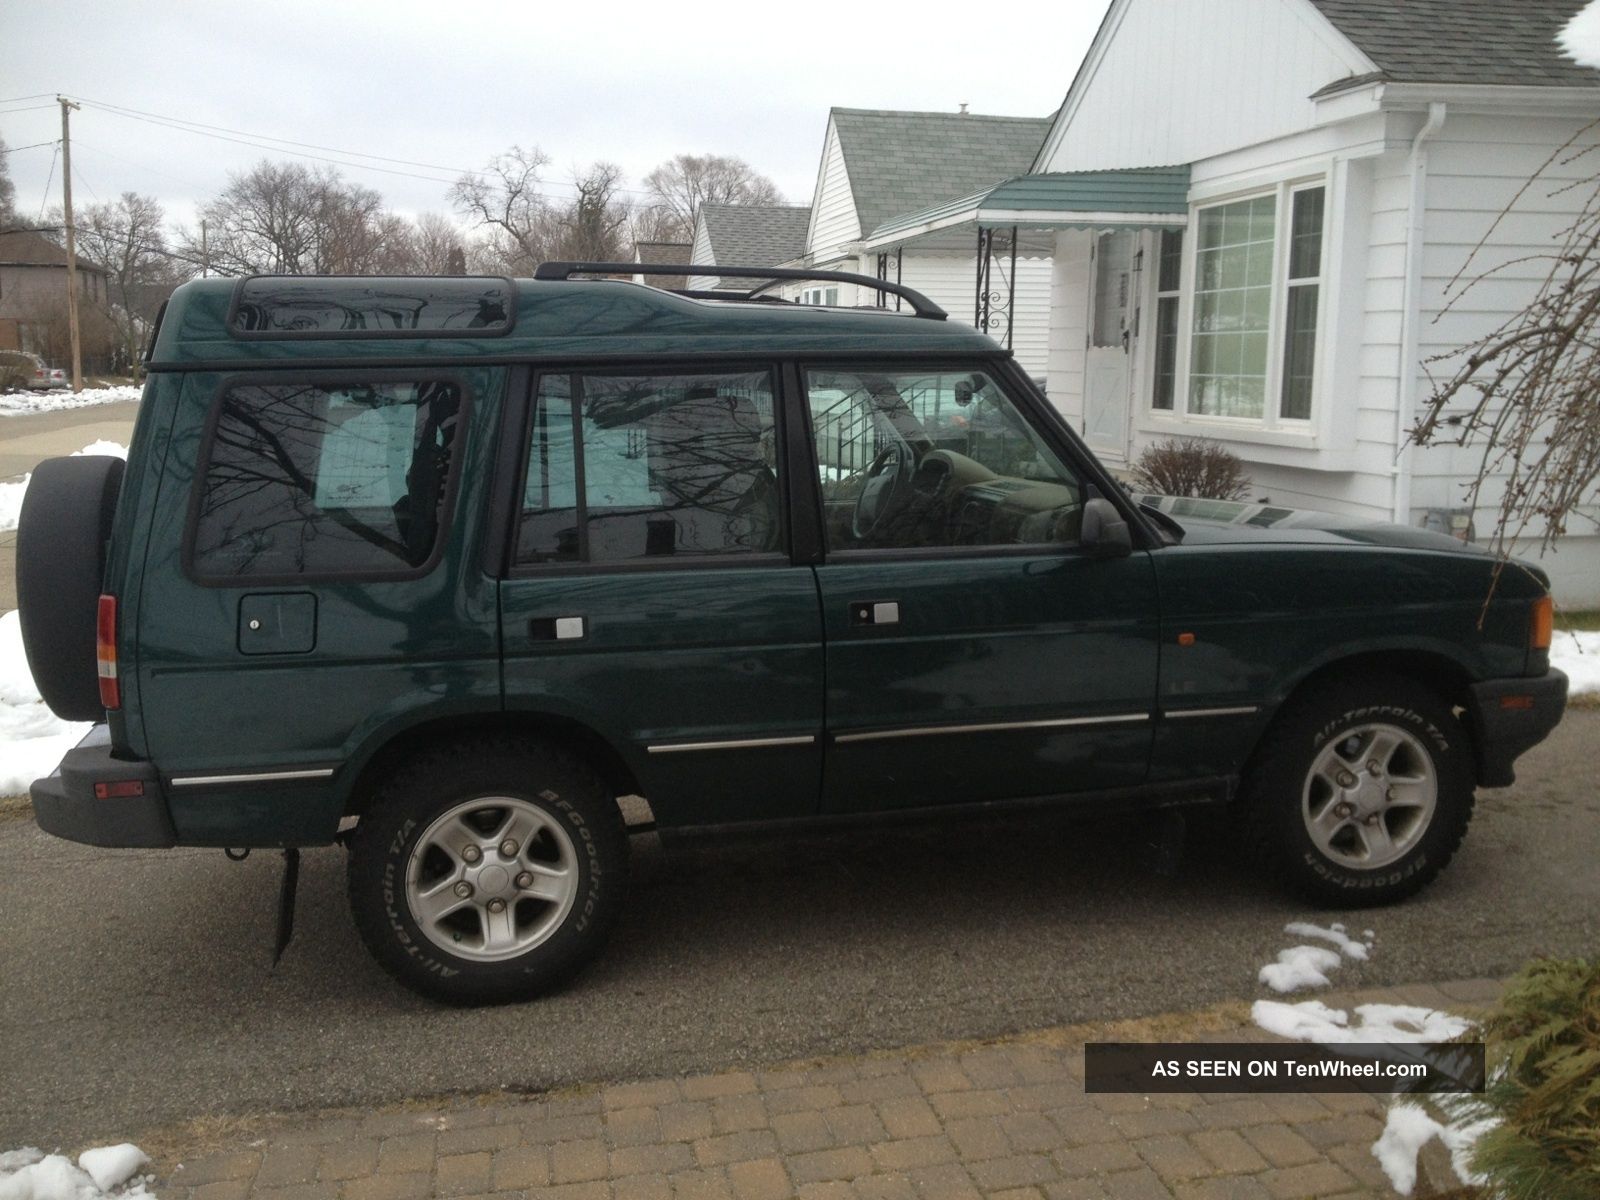 Land Rover Discovery #14